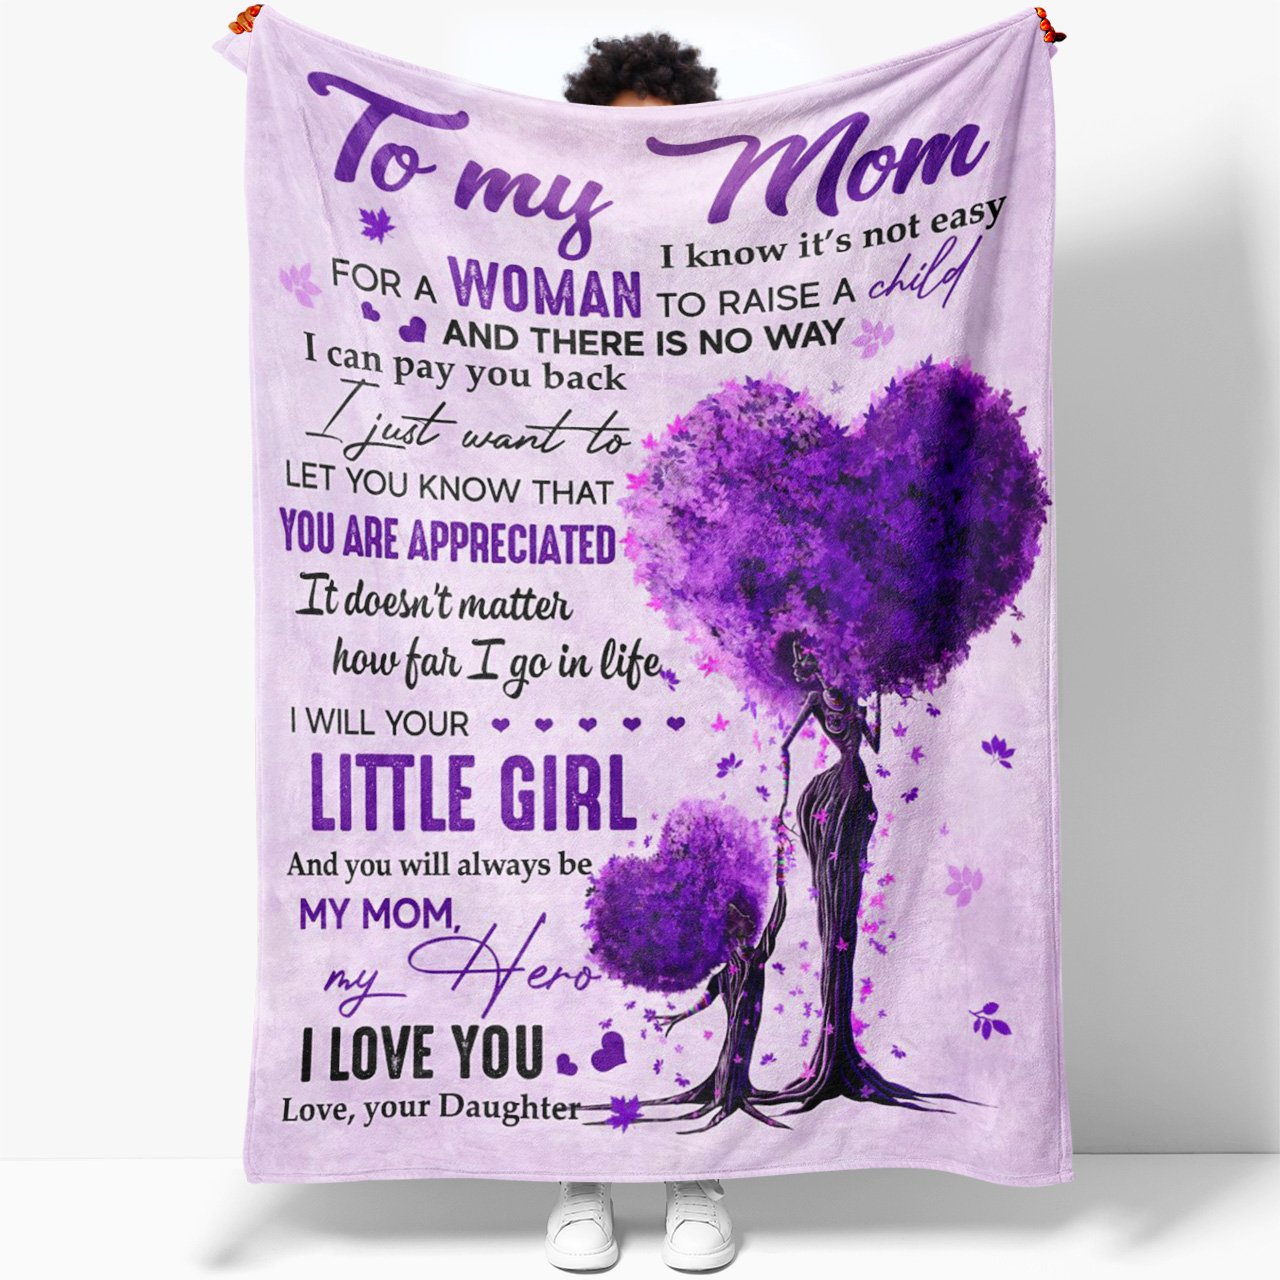 Blanket Gift Ideas for My Daughter, It's Not Easy for a Woman to Raise a Child Blanket, Birthday Ideas For Daughter, Graduation Gift For Daughter